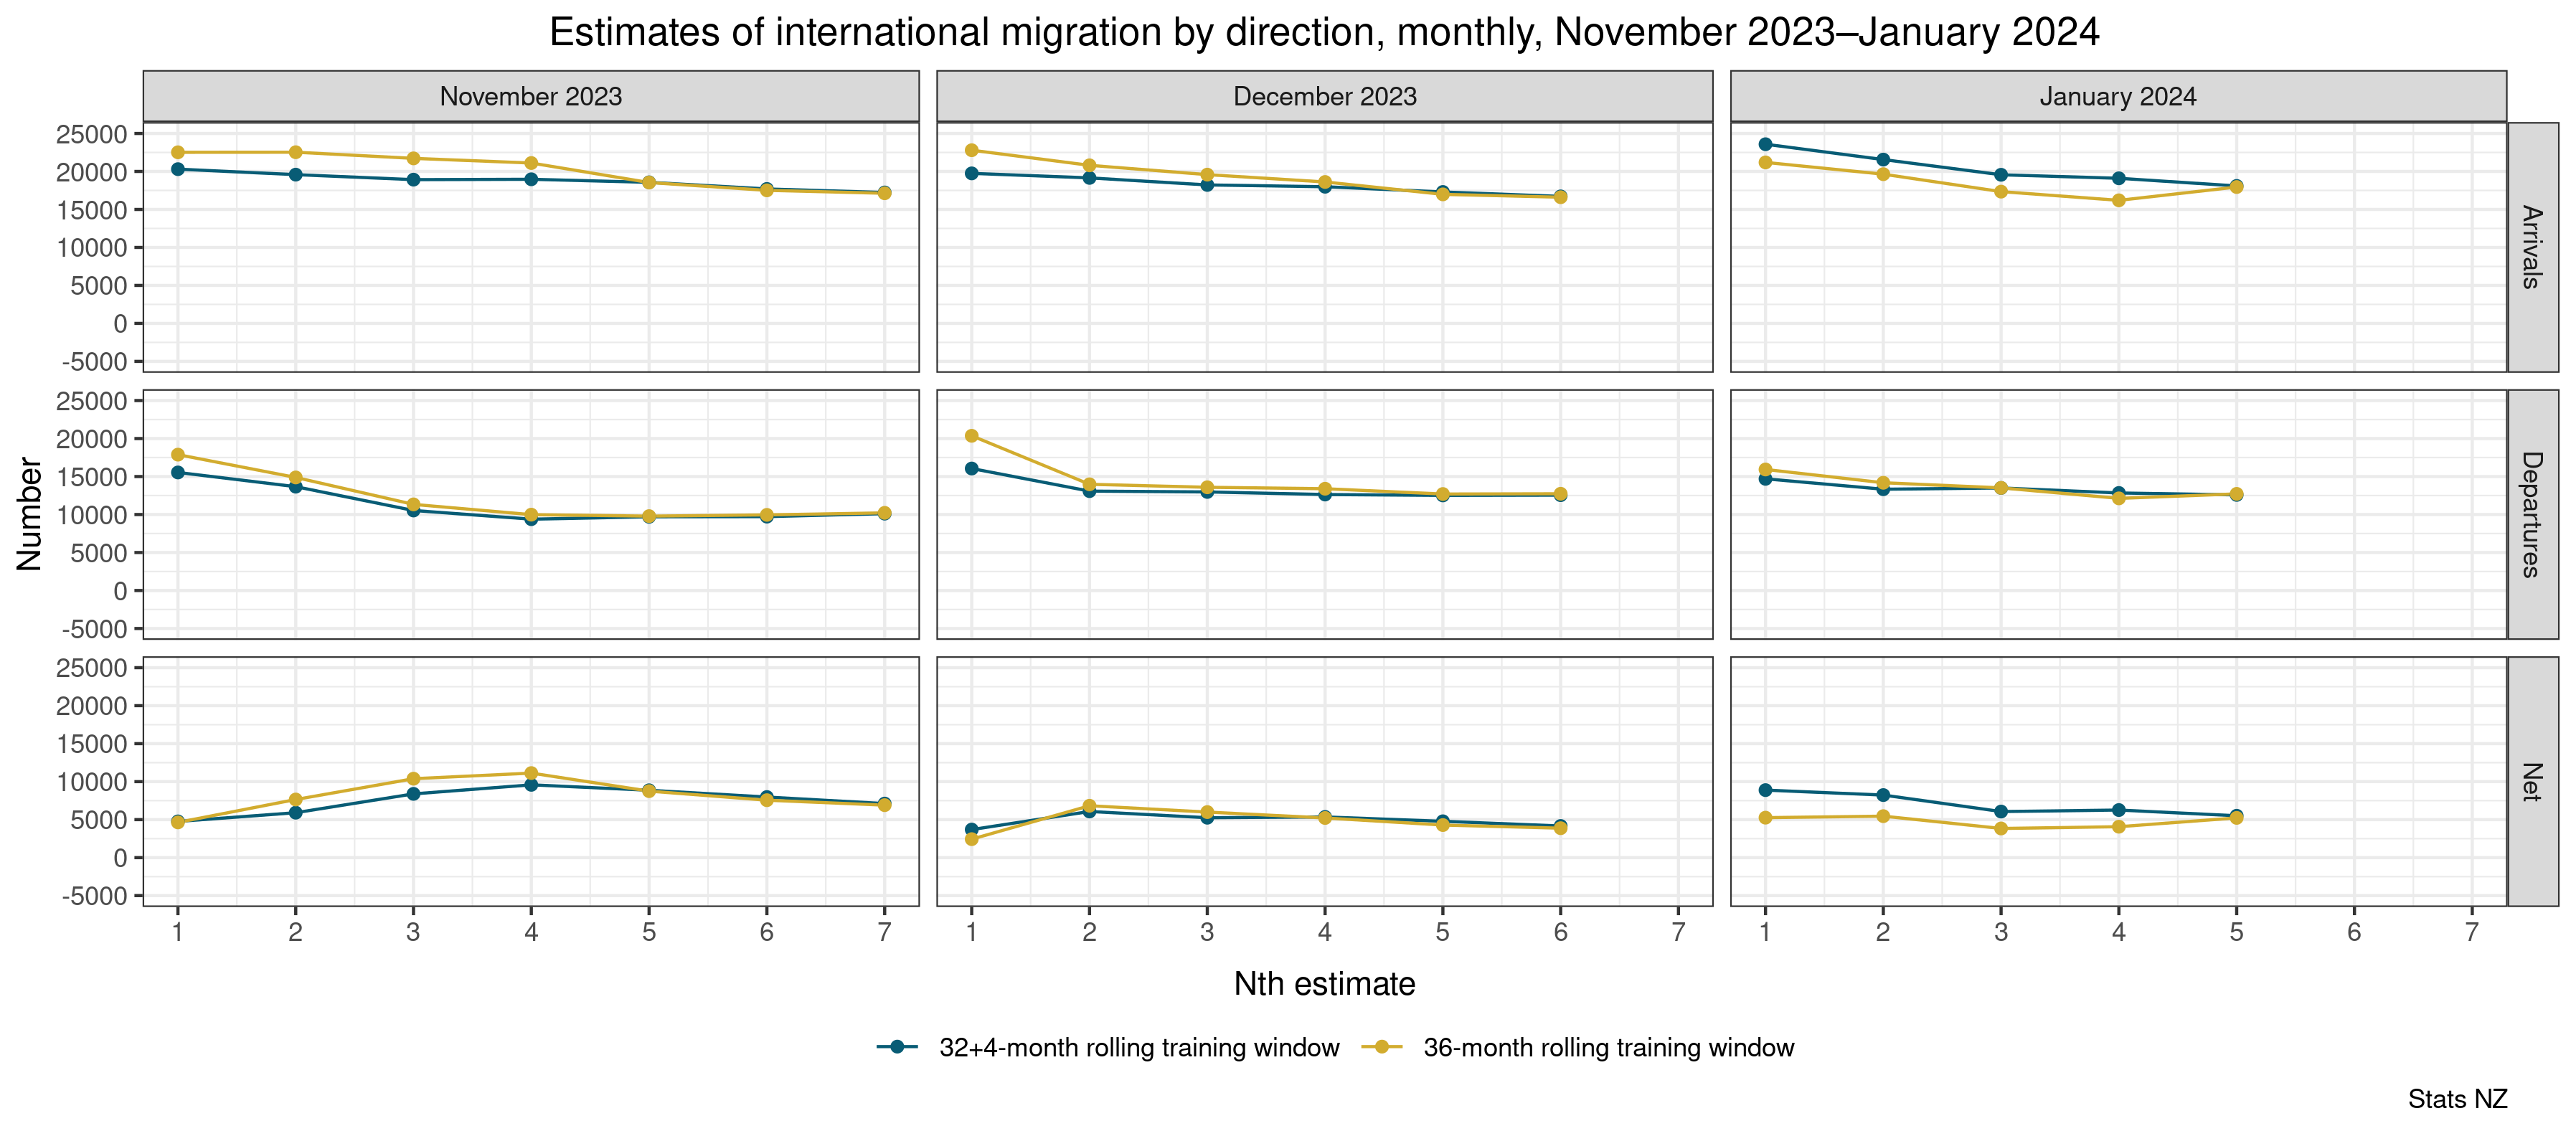 This three-by-three matrix of line graphs shows estimates of international migration by direction, monthly, November 2023-January 2024. See the text alternative under image.